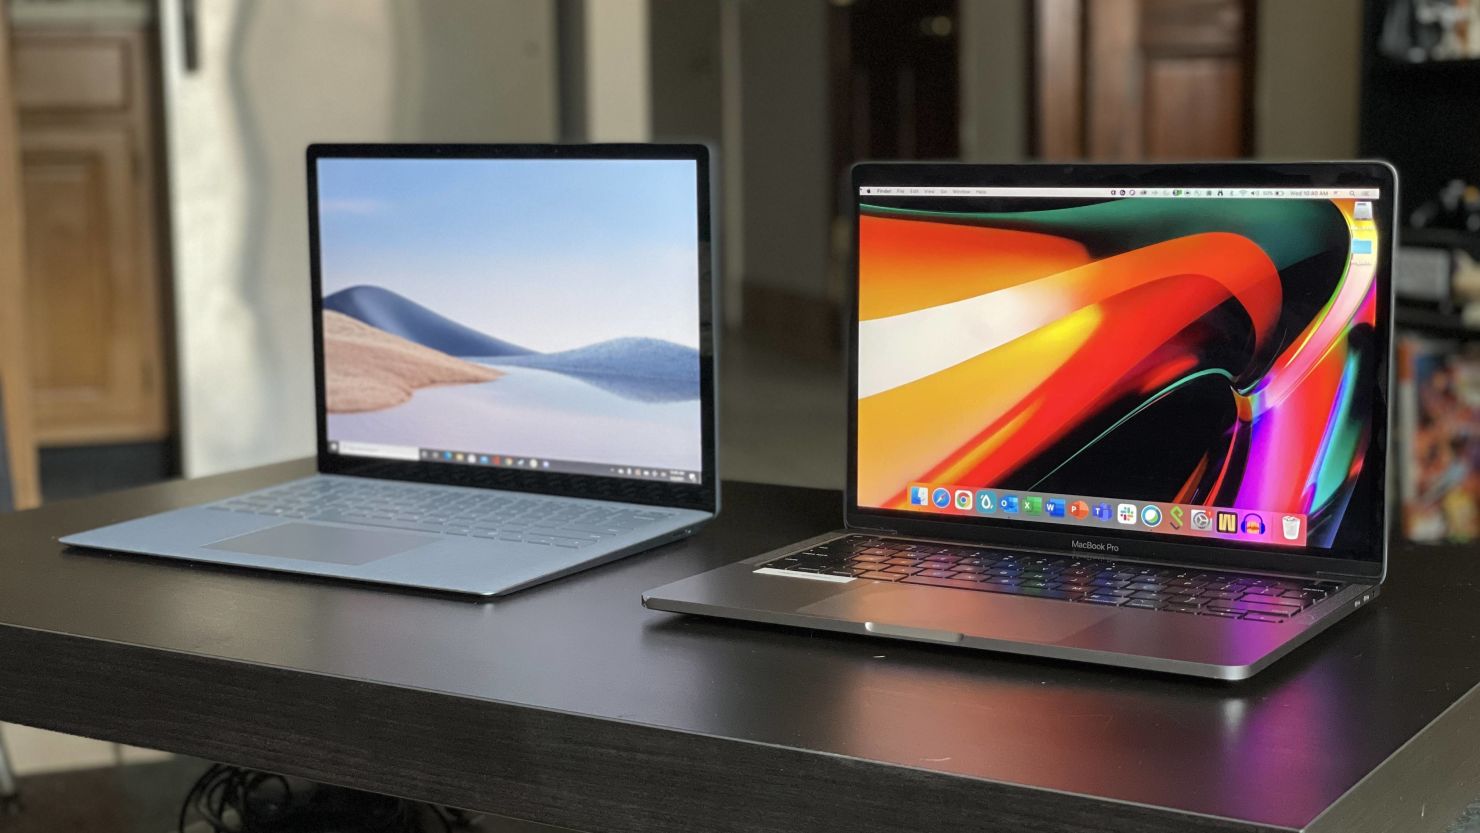 Here's the deal with new, super-sleek, gold MacBook